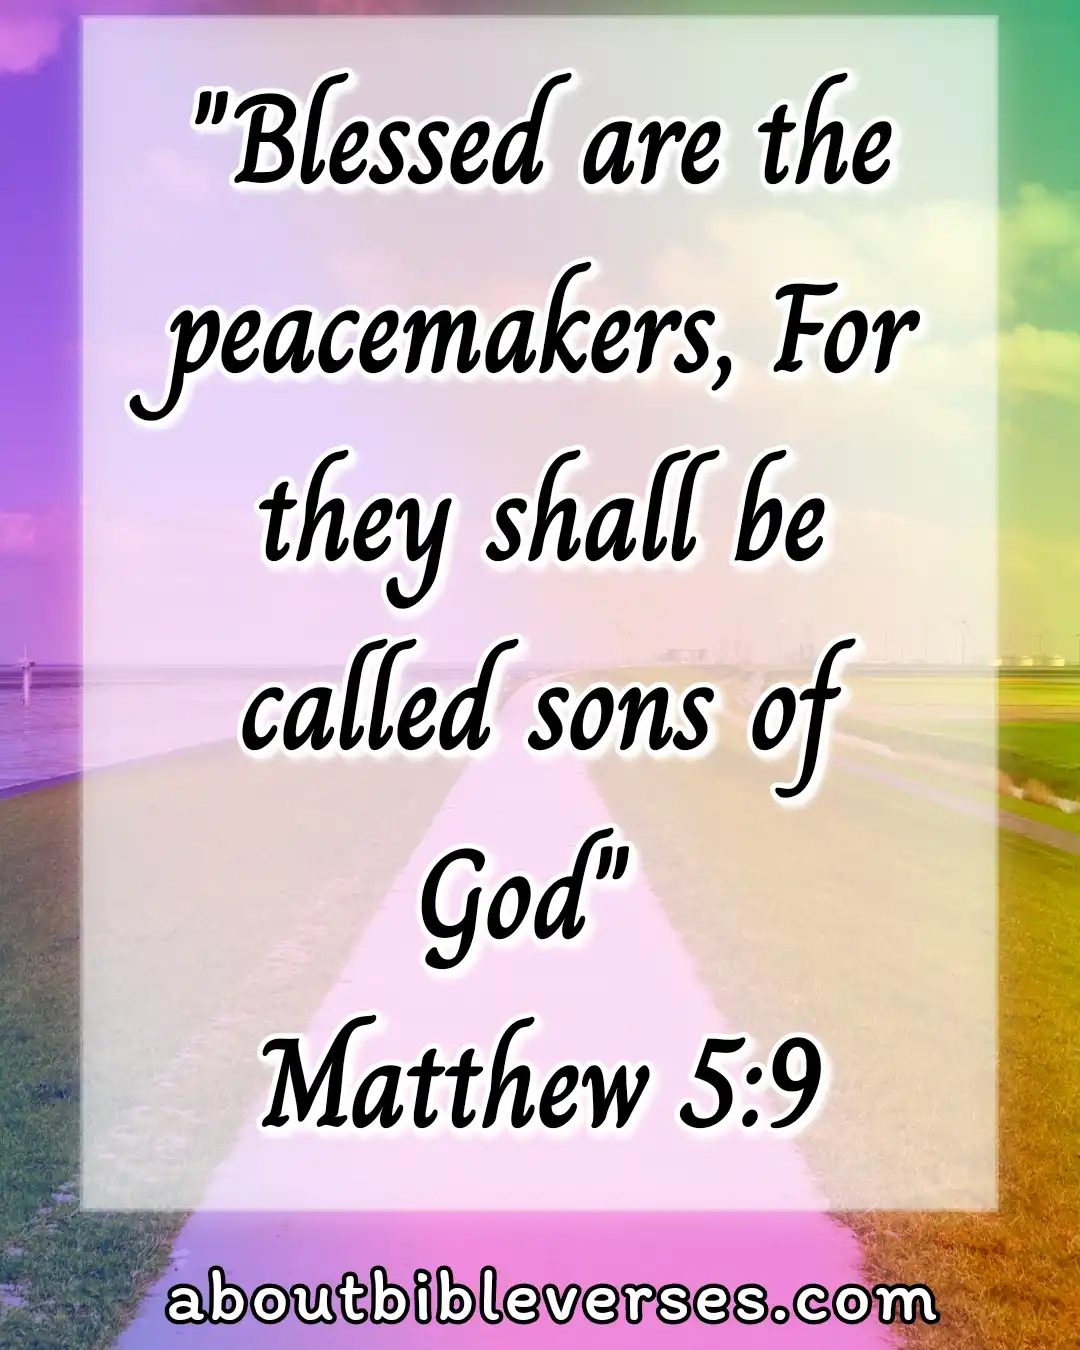 Bible Verses On Blessed Are The Peacemakers (Matthew 5:9)